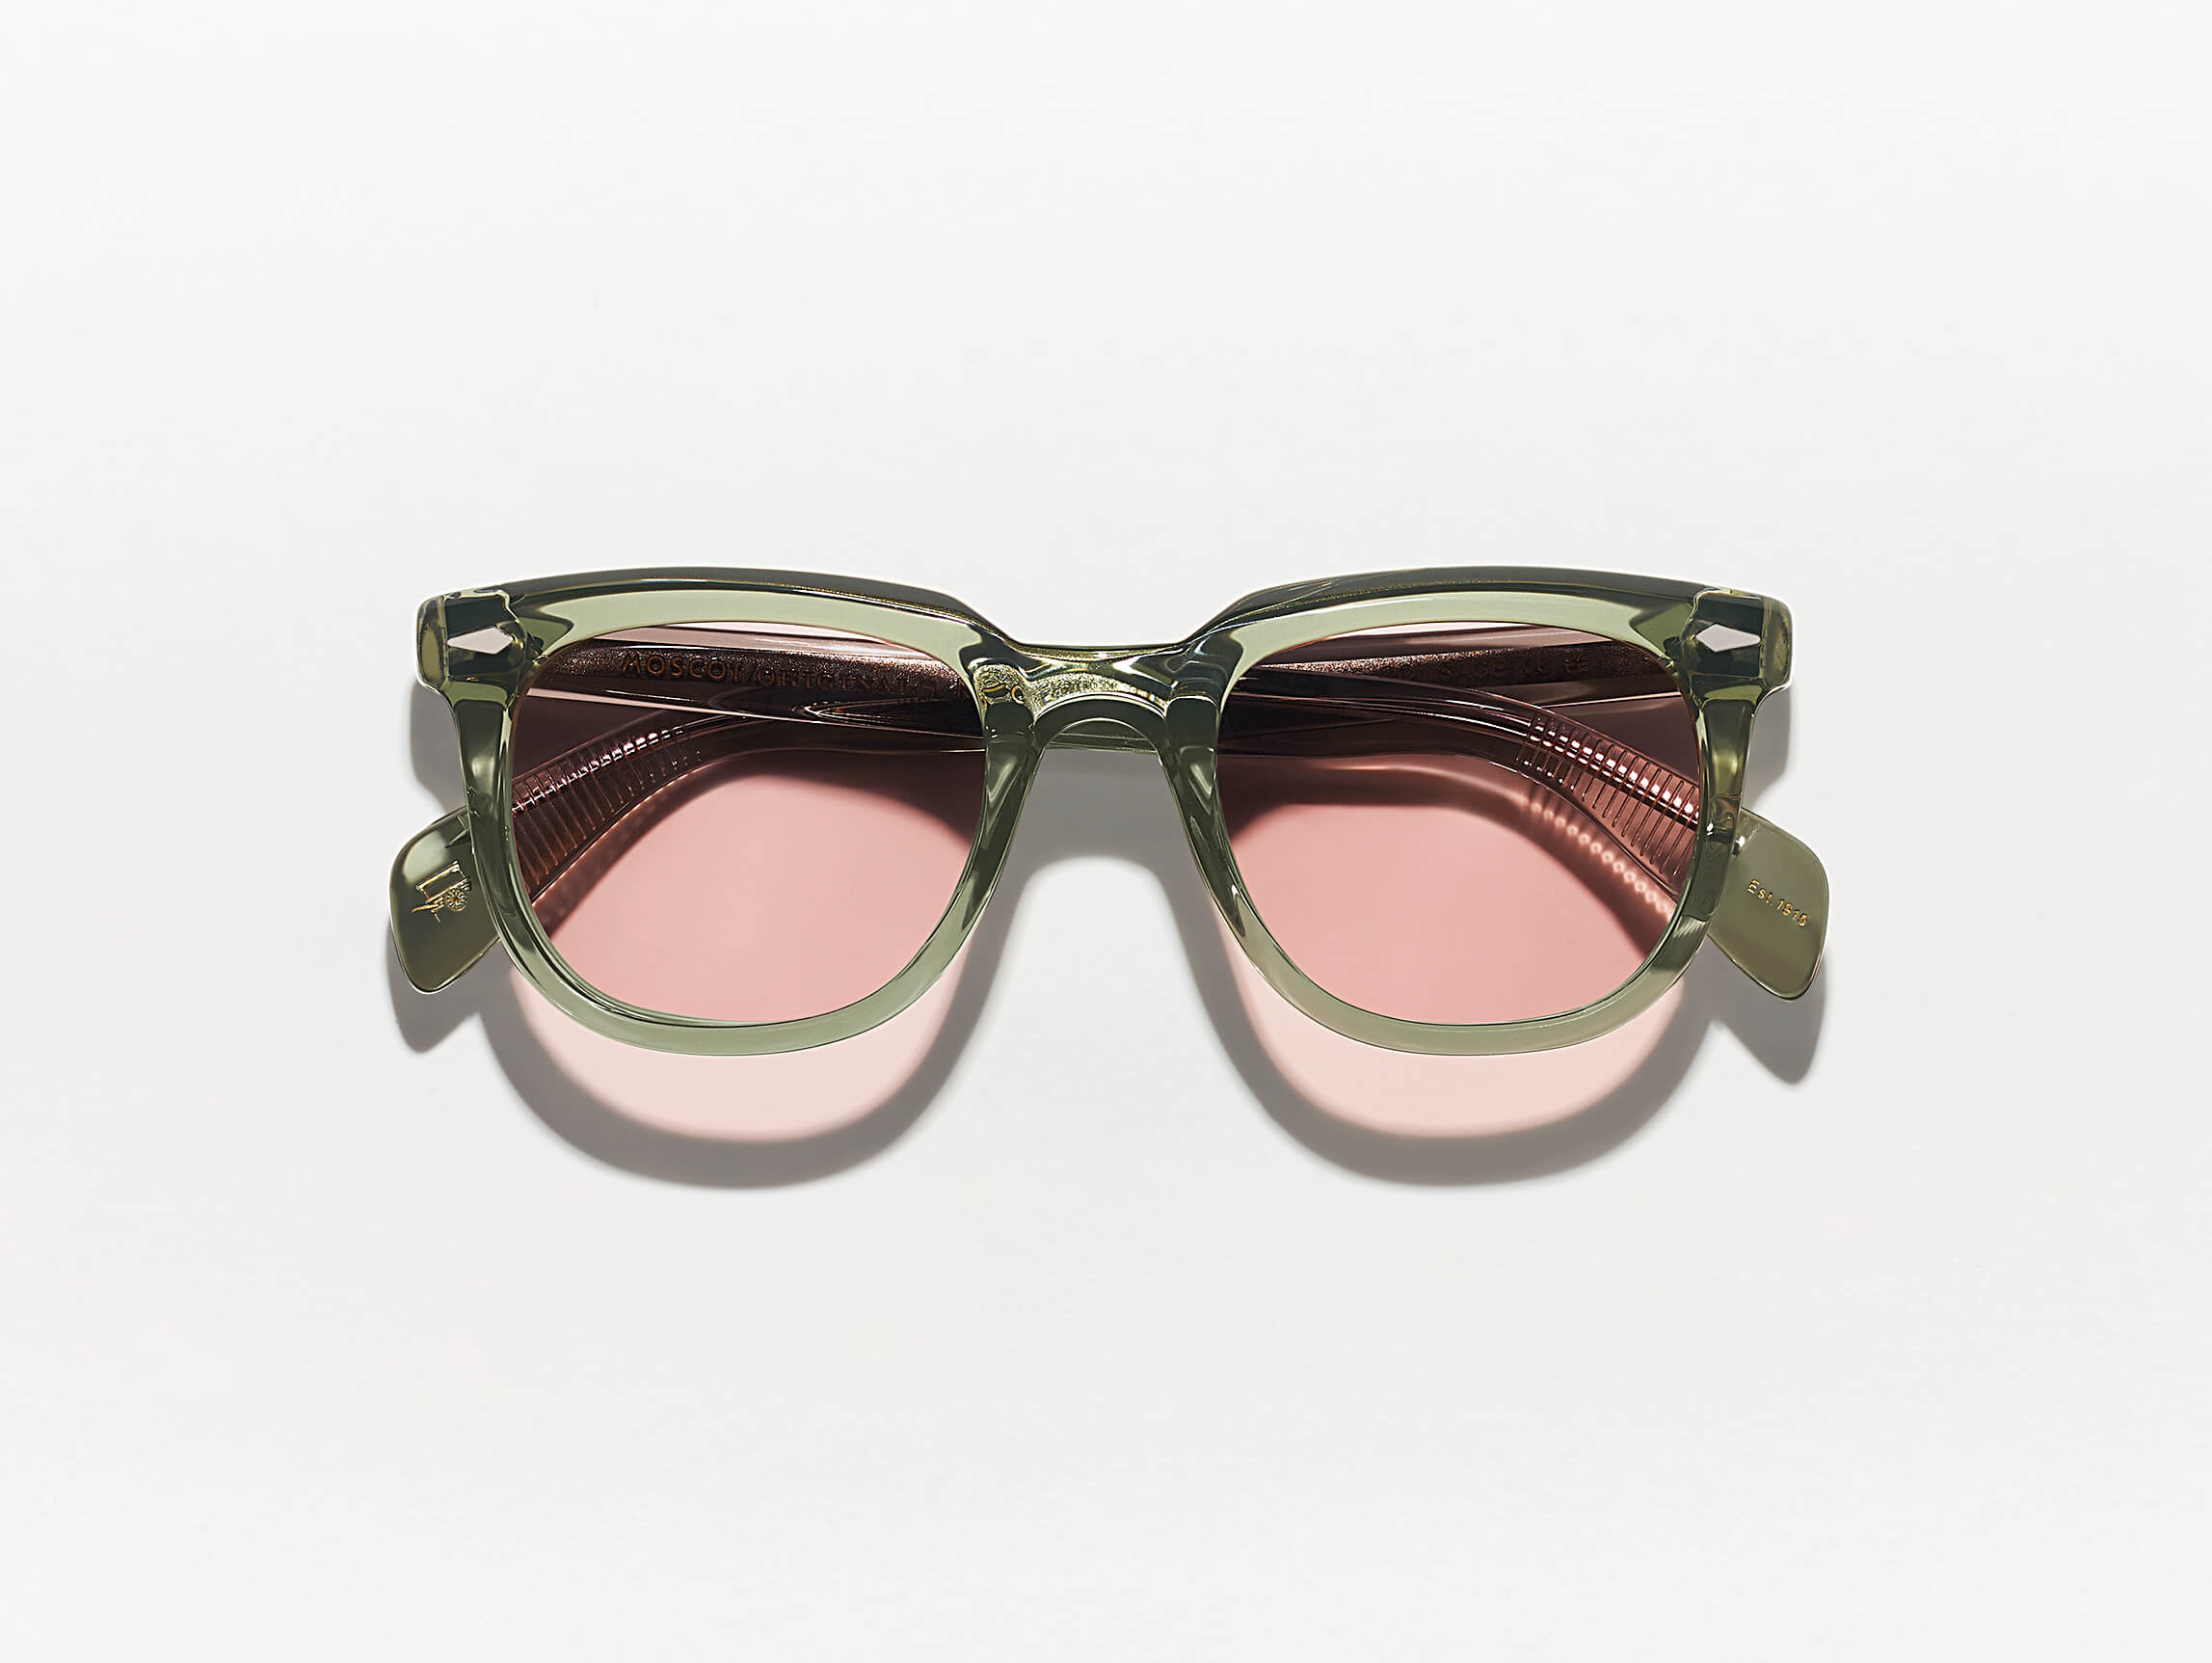 The YONTIF Pastel with New York Rose Tinted Lenses